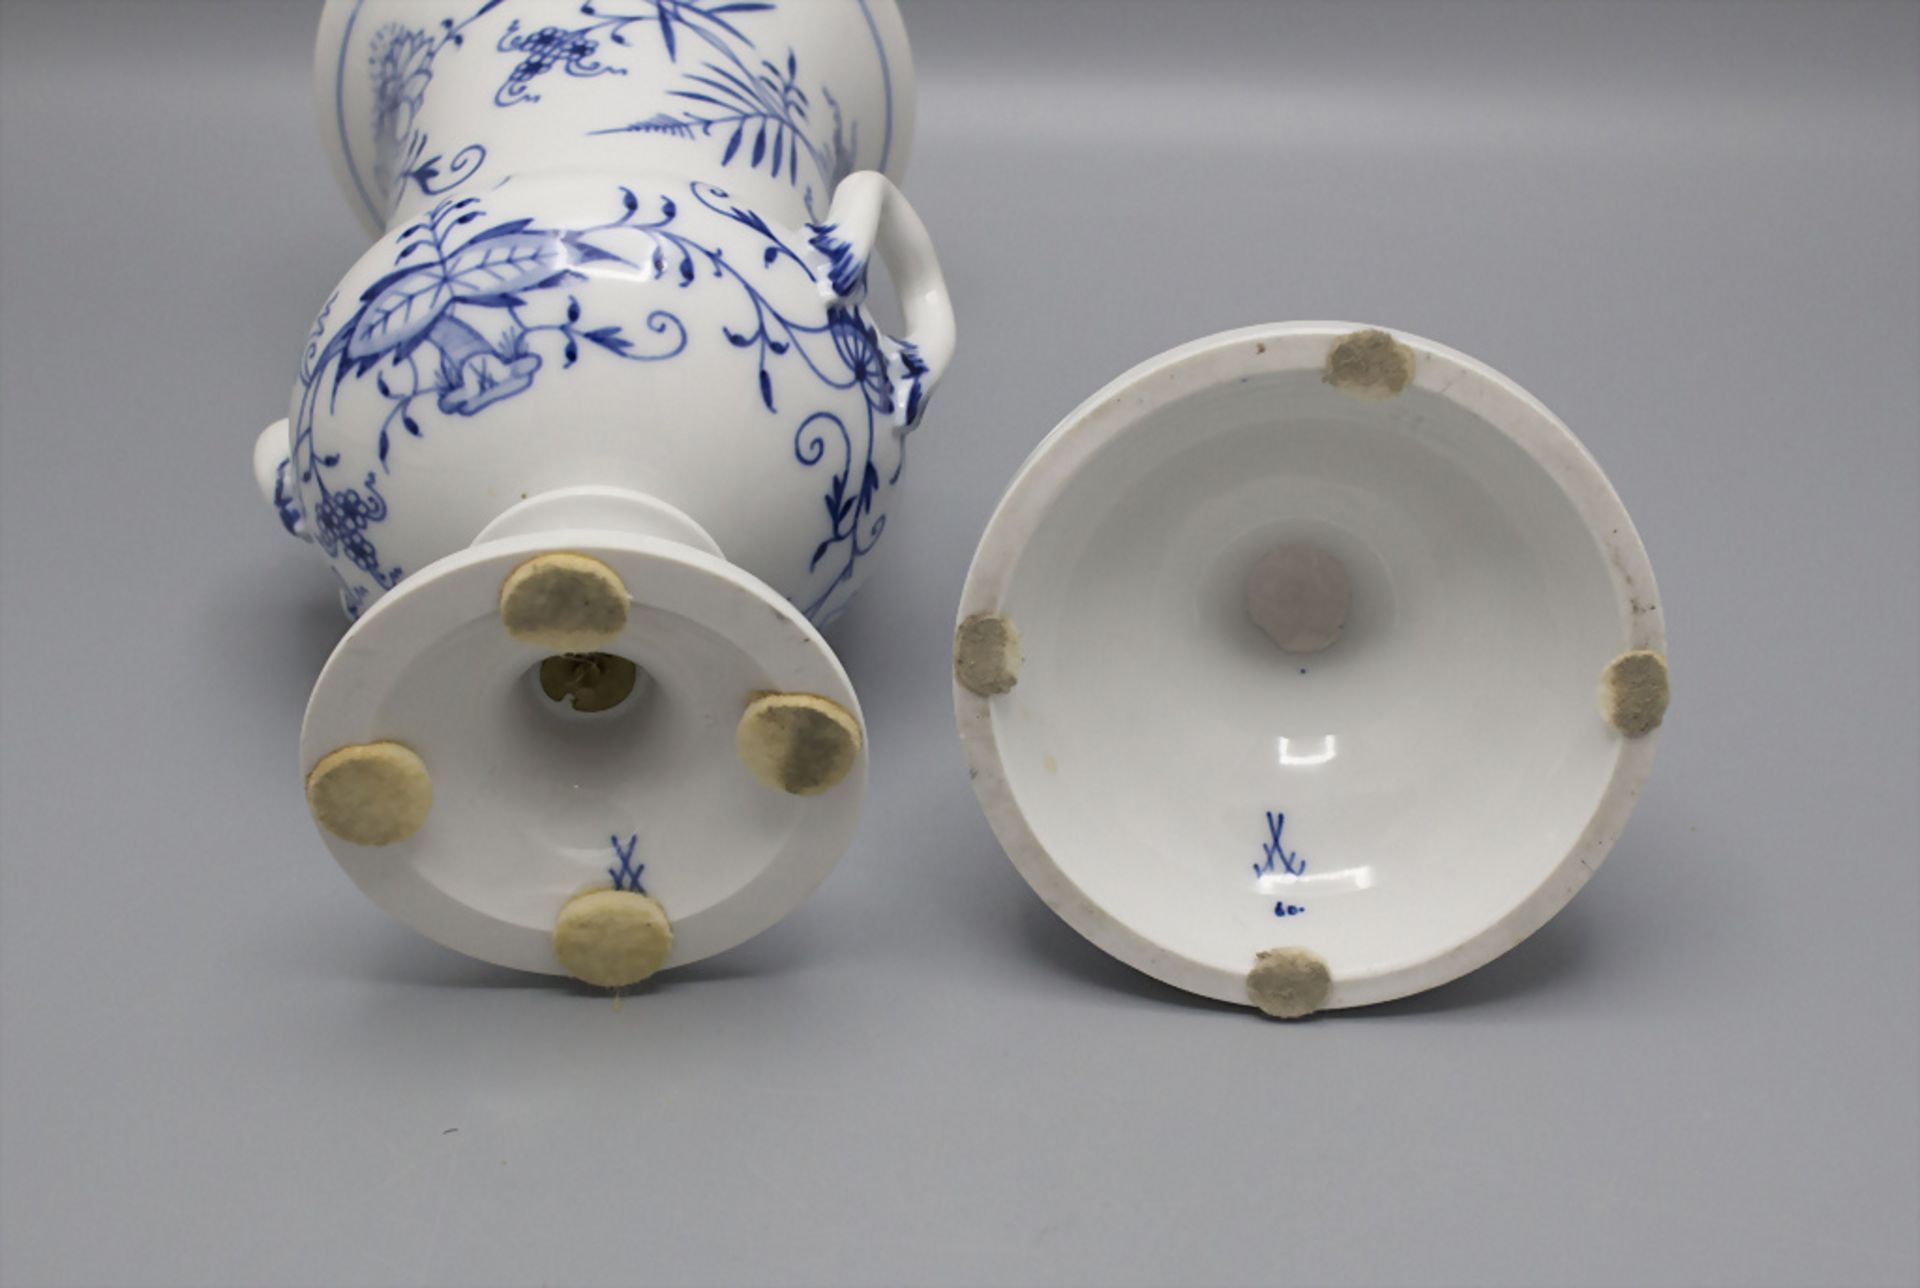 3 Teile Zwiebelmuster / 3 pieces of porcelain with onion pattern, Meissen, 20. Jh. - Image 6 of 6